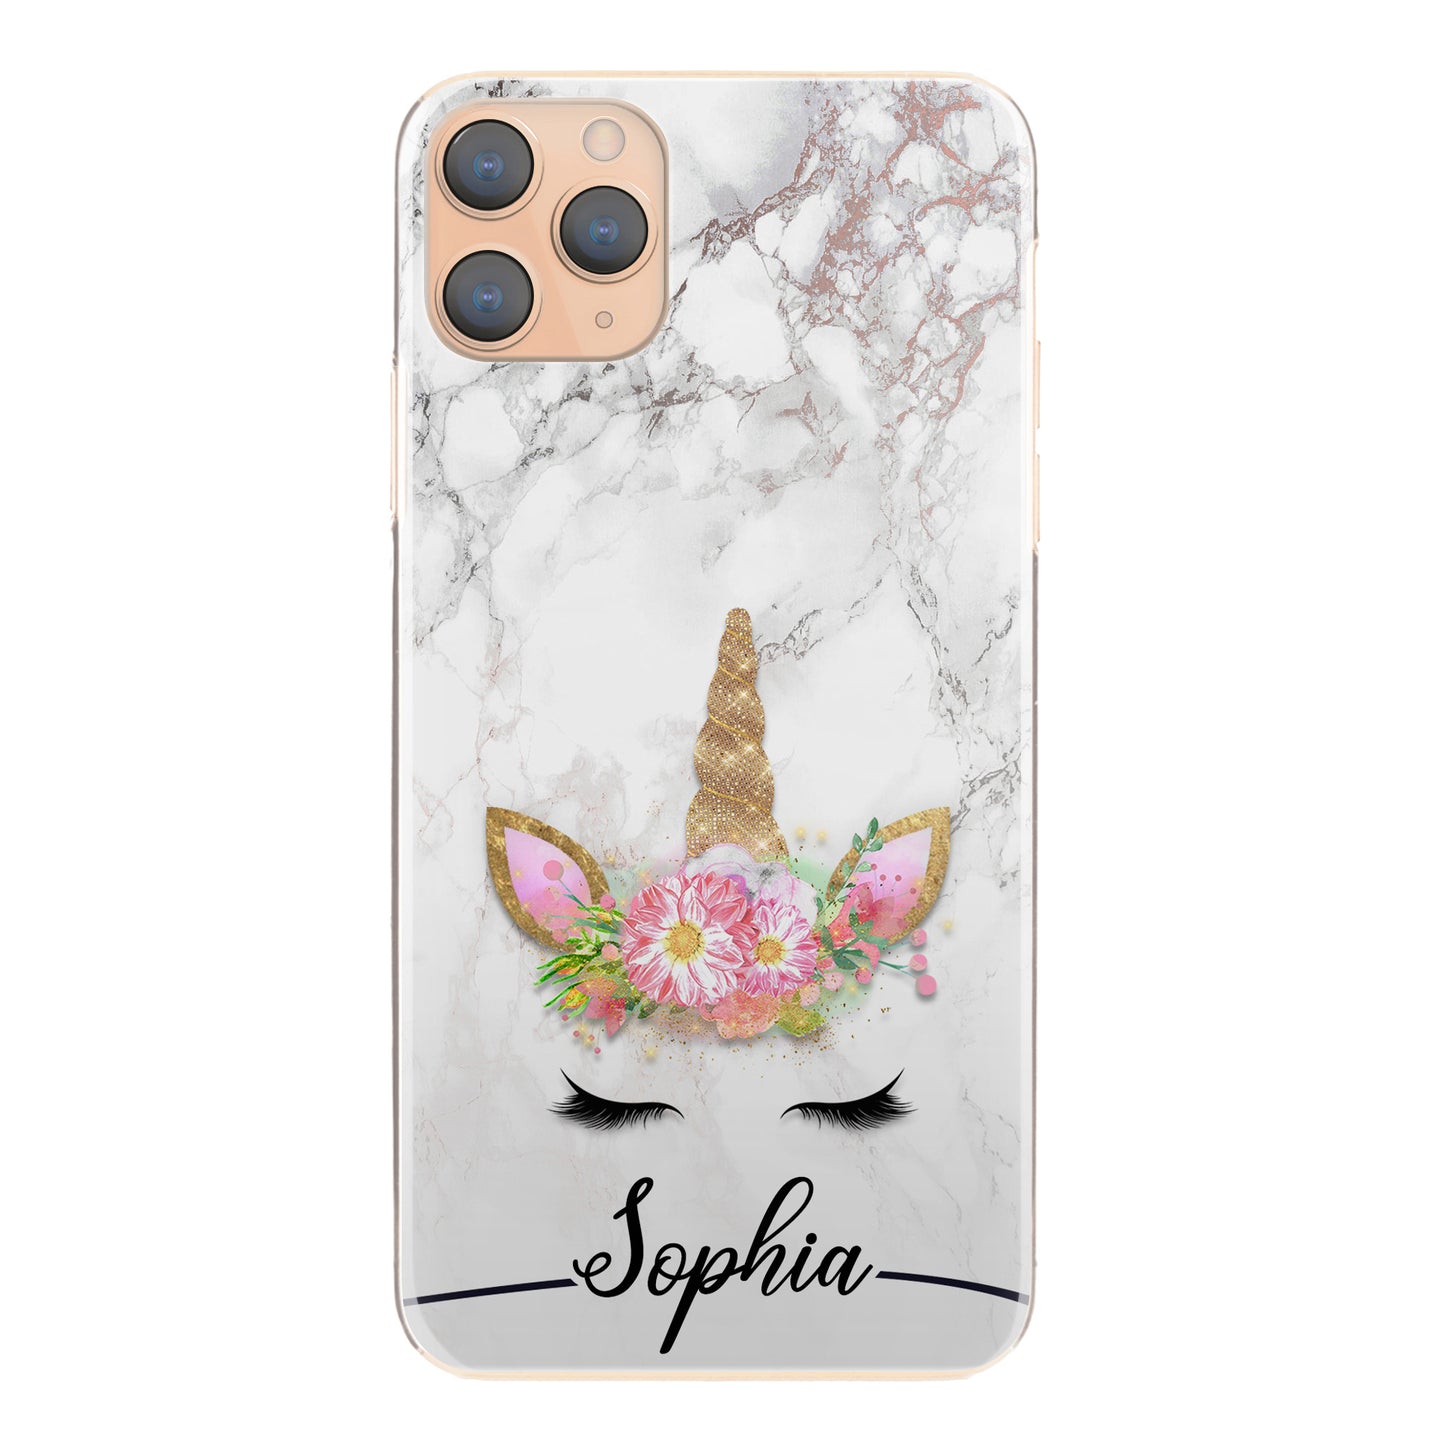 Personalised Apple iPhone Hard Case with Gold Floral Unicorn and Text on Grey Marble